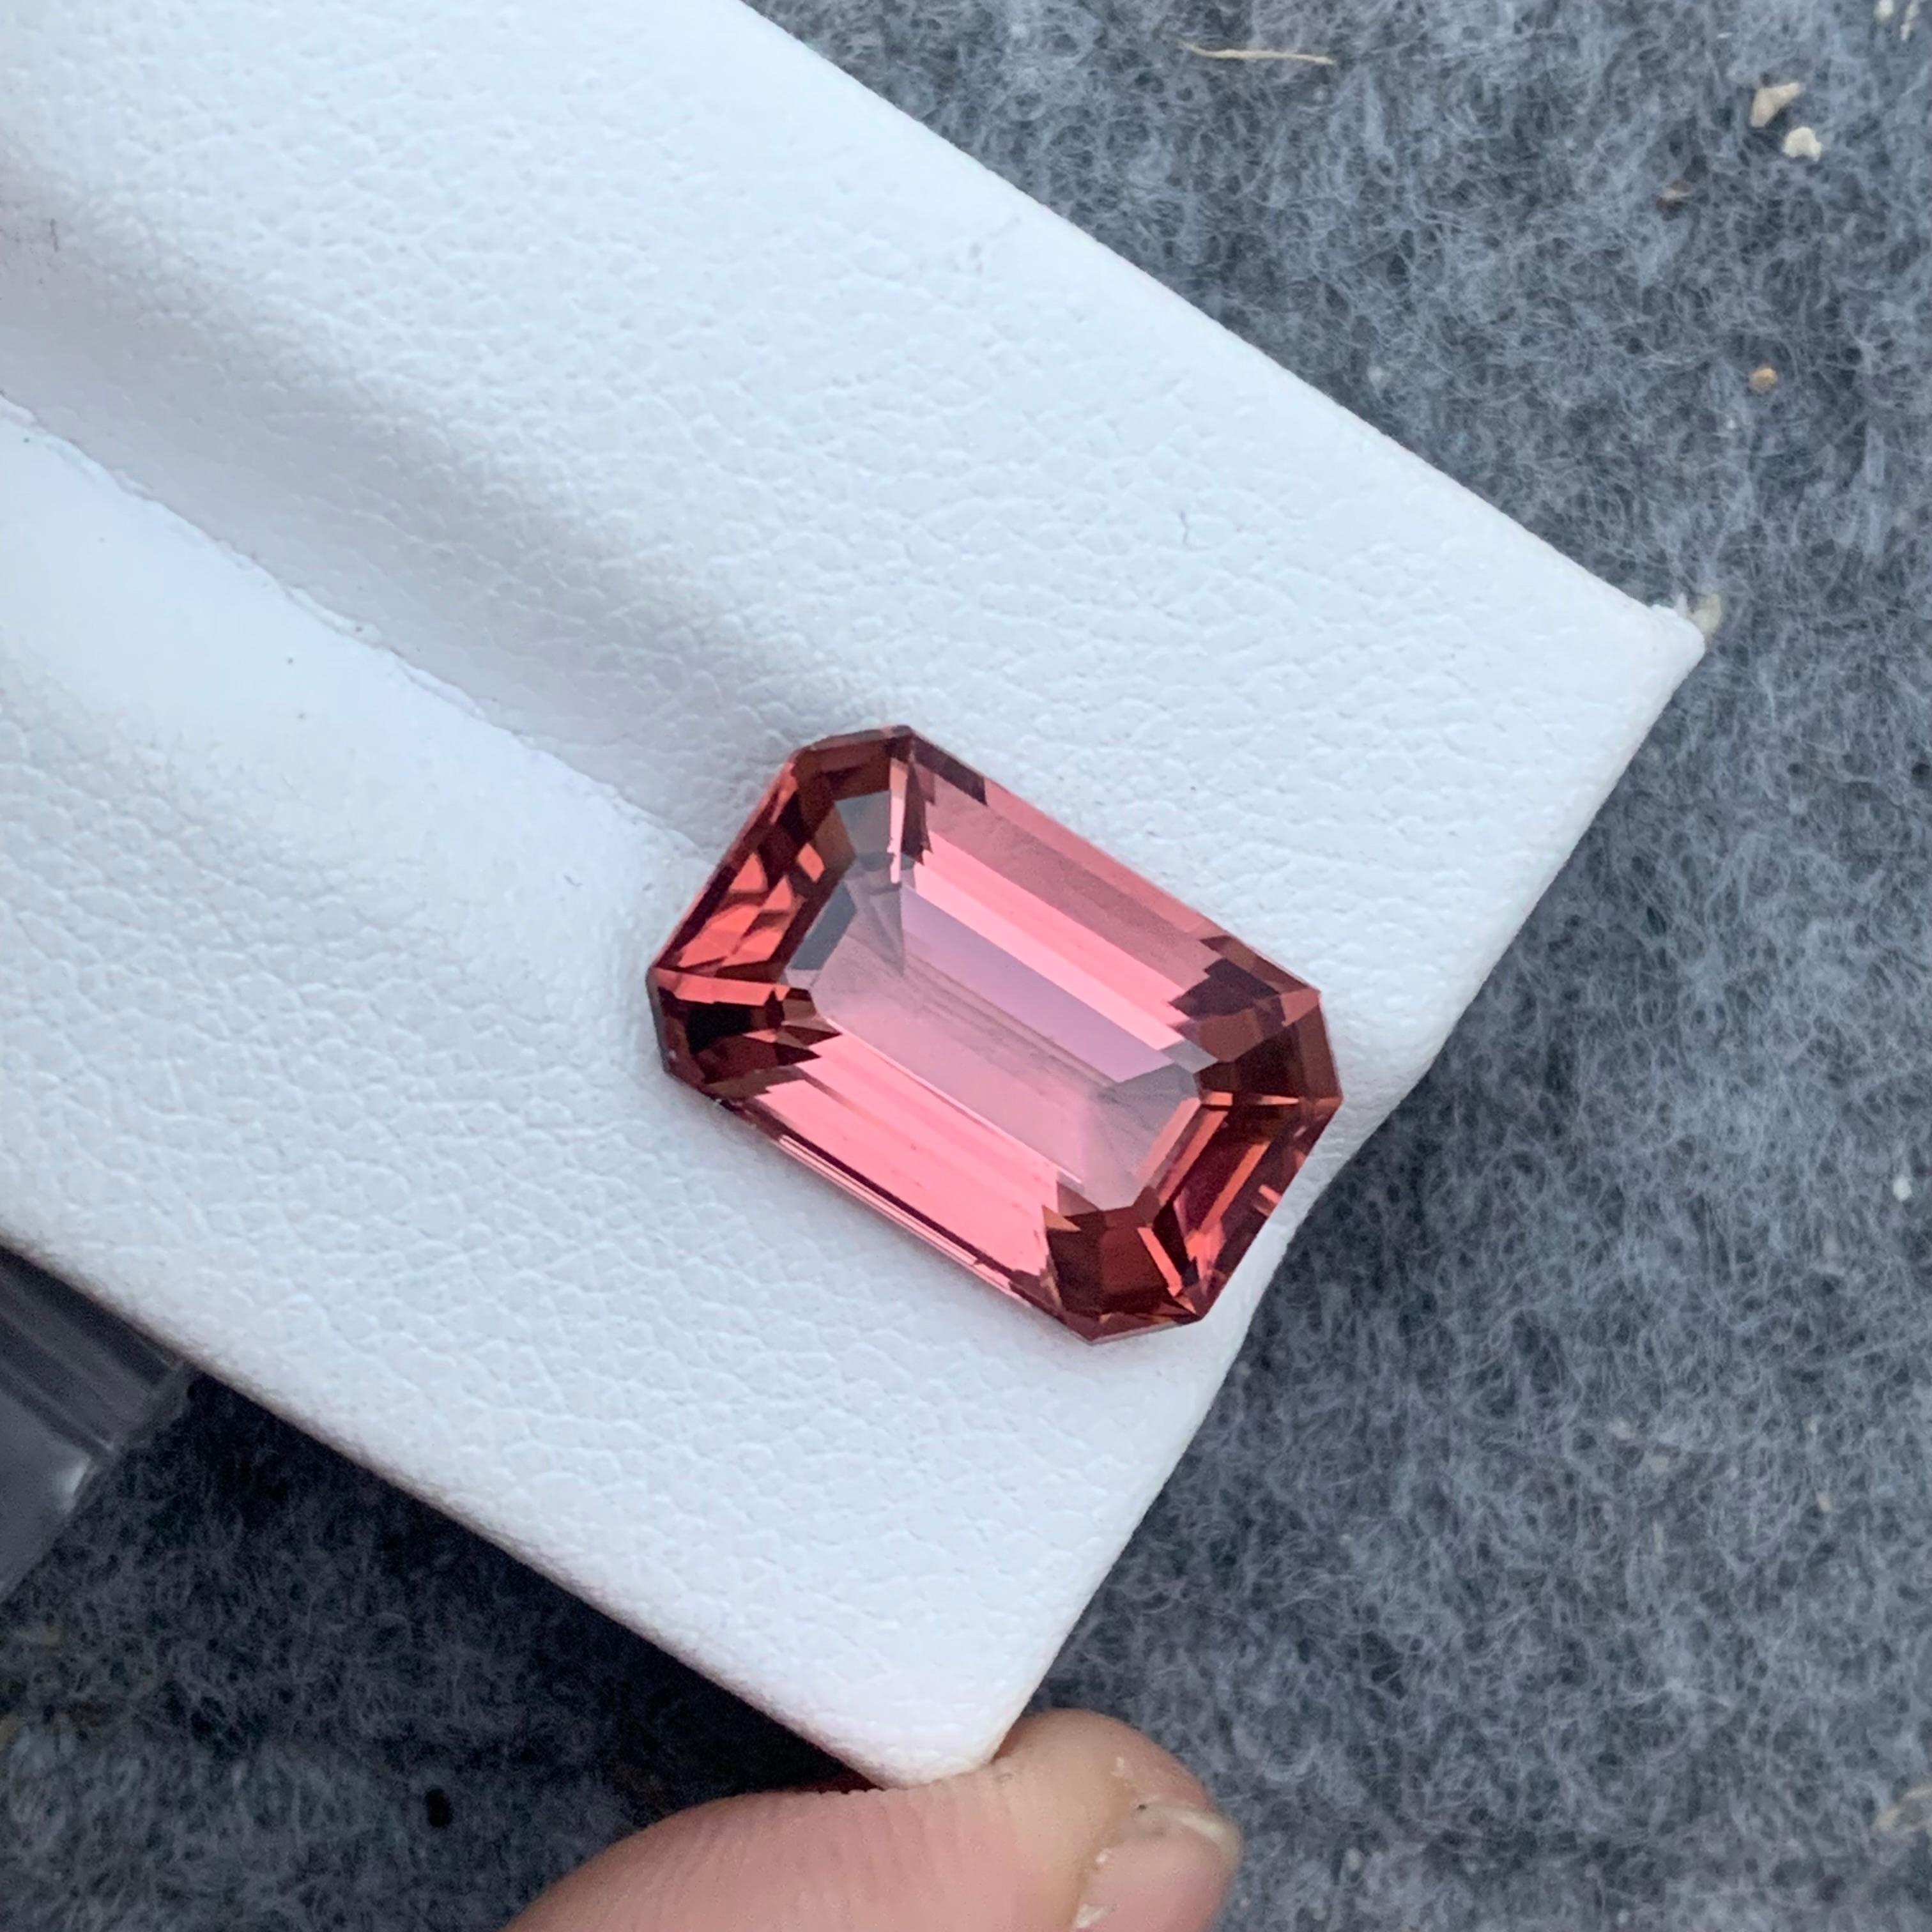 9.0 Carat AAA Quality Loose Soft Pink Tourmaline Emerald Cut From Afghanistan 10